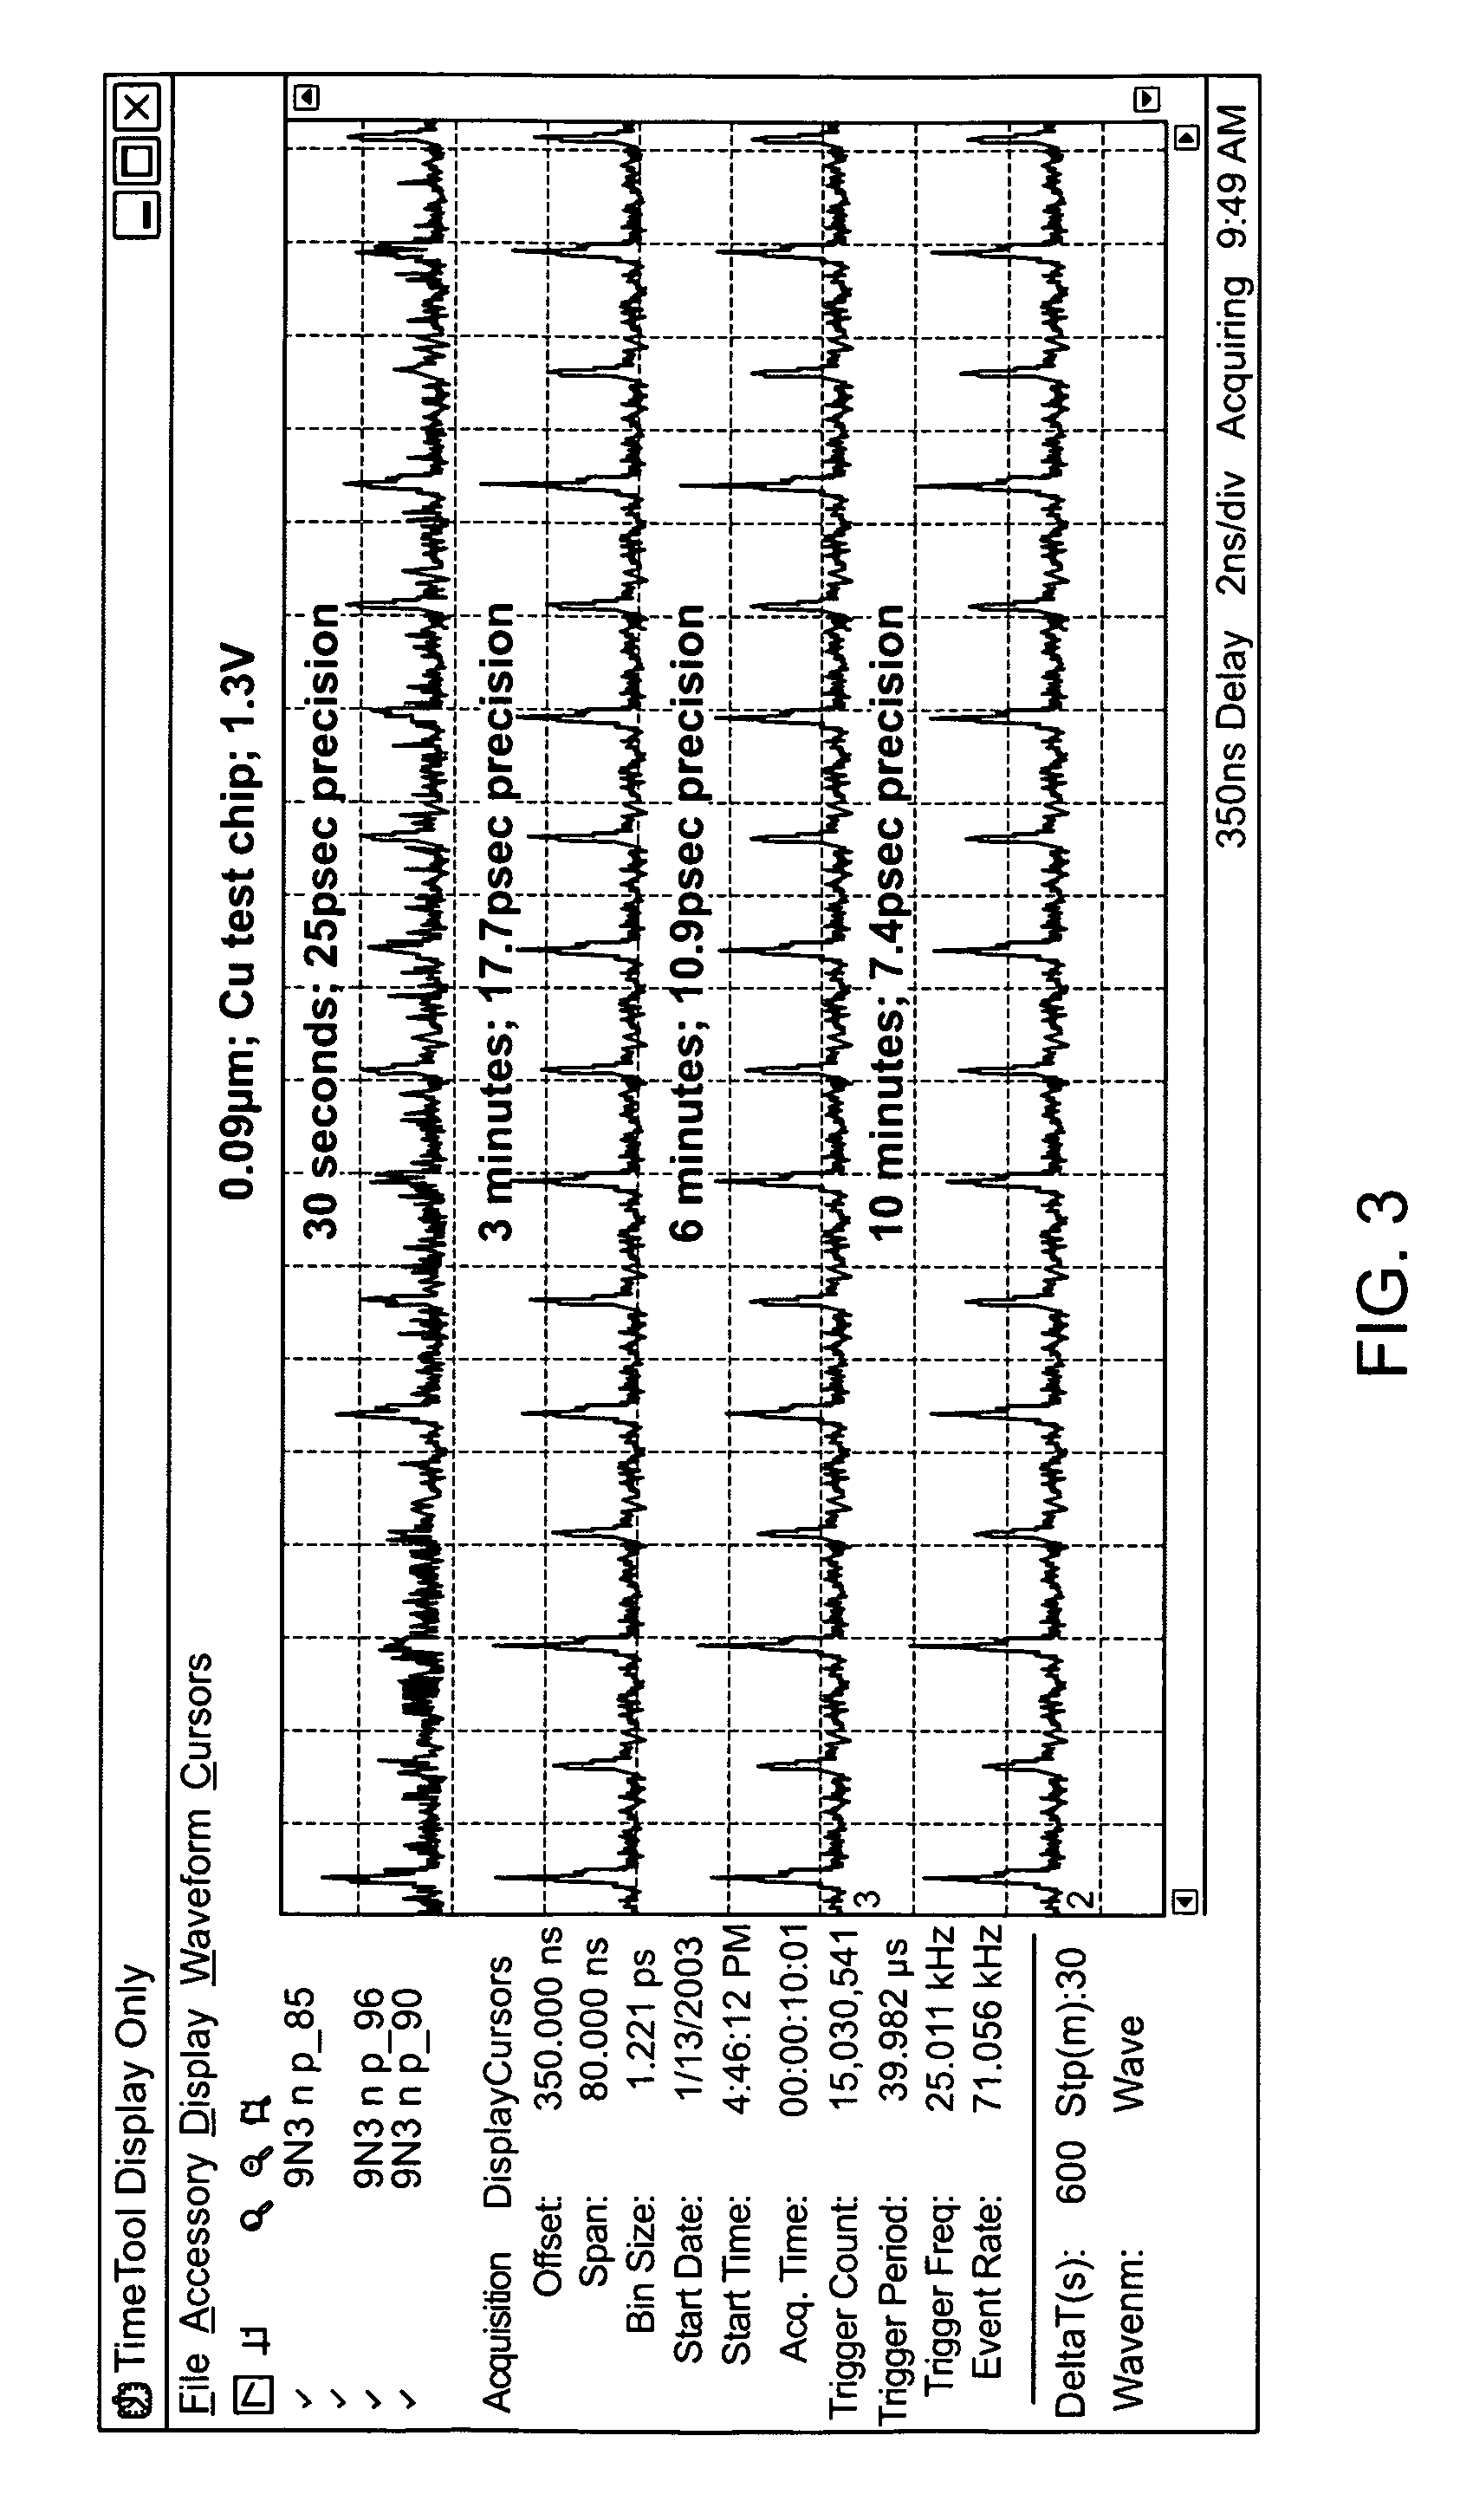 Method and article of manufacture to generate IC test vector for synchronized physical probing